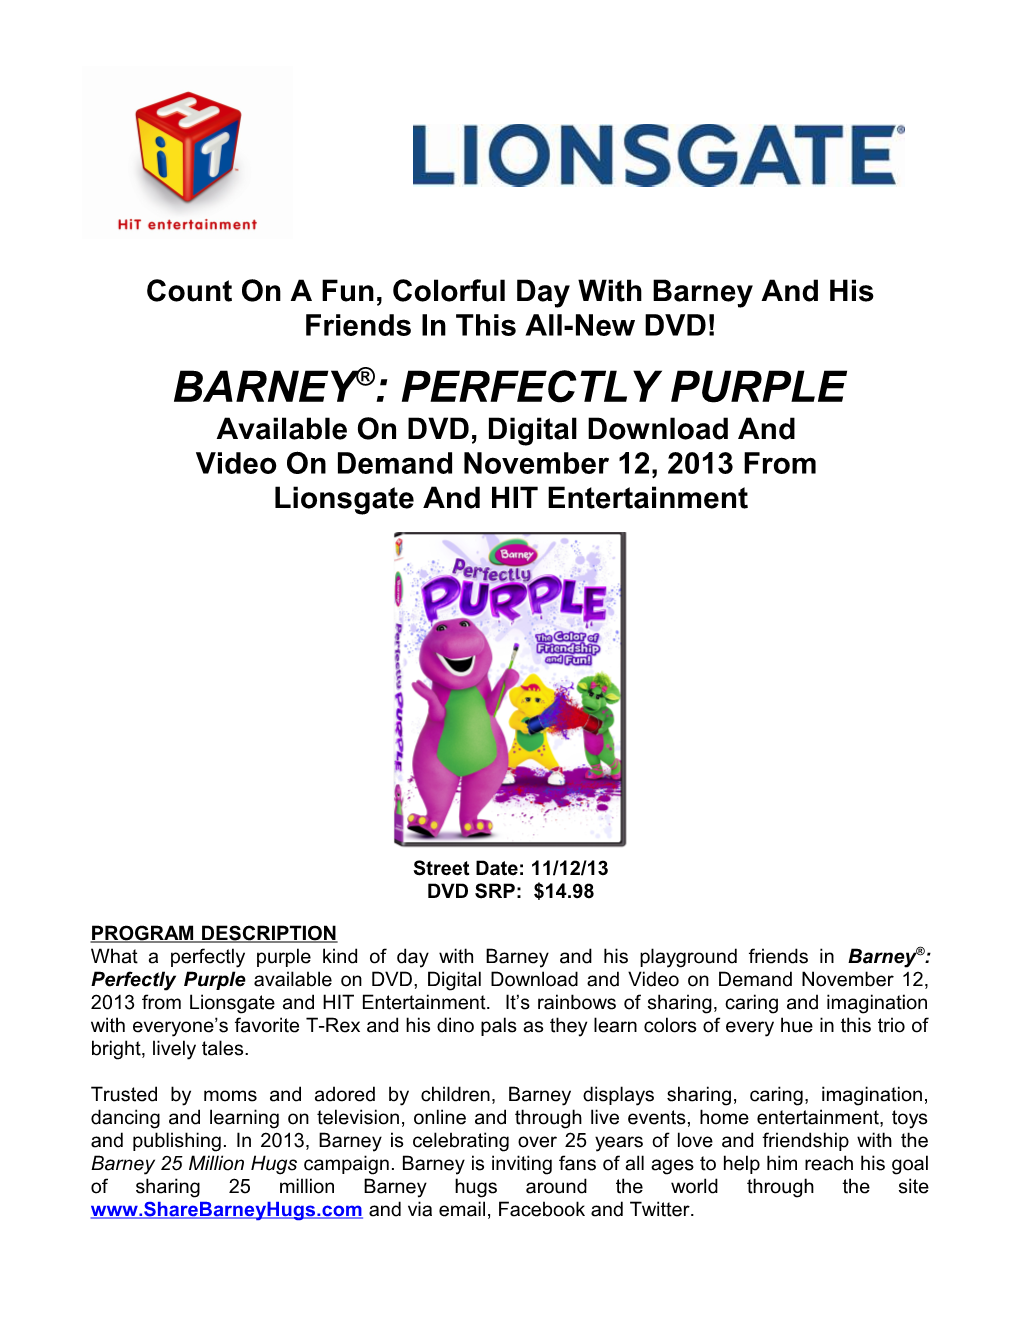 Count on a Fun, Colorful Day with Barney and His Friends in This All-New DVD!